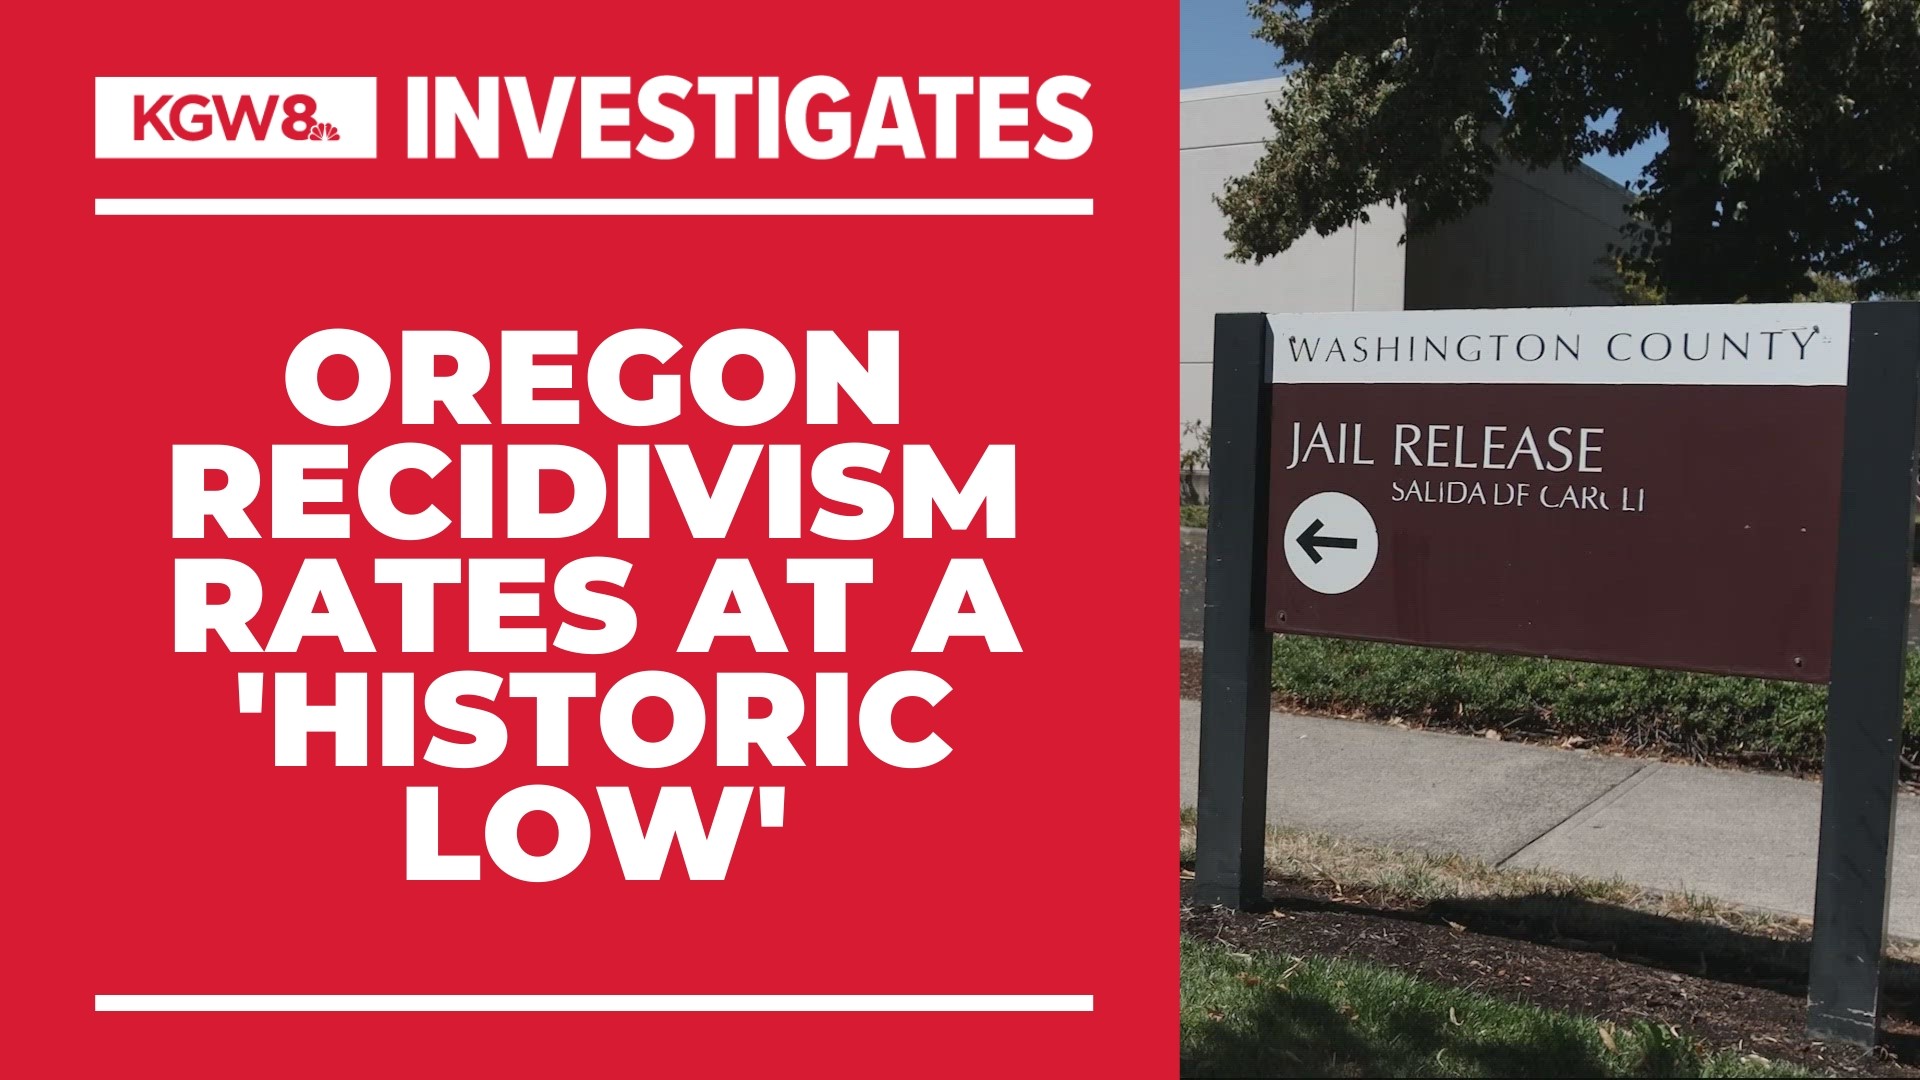 Oregon's rates of recidivism have dropped recently and look lower than national averages. Those statistics are relevant to the recently linked deaths of four women.